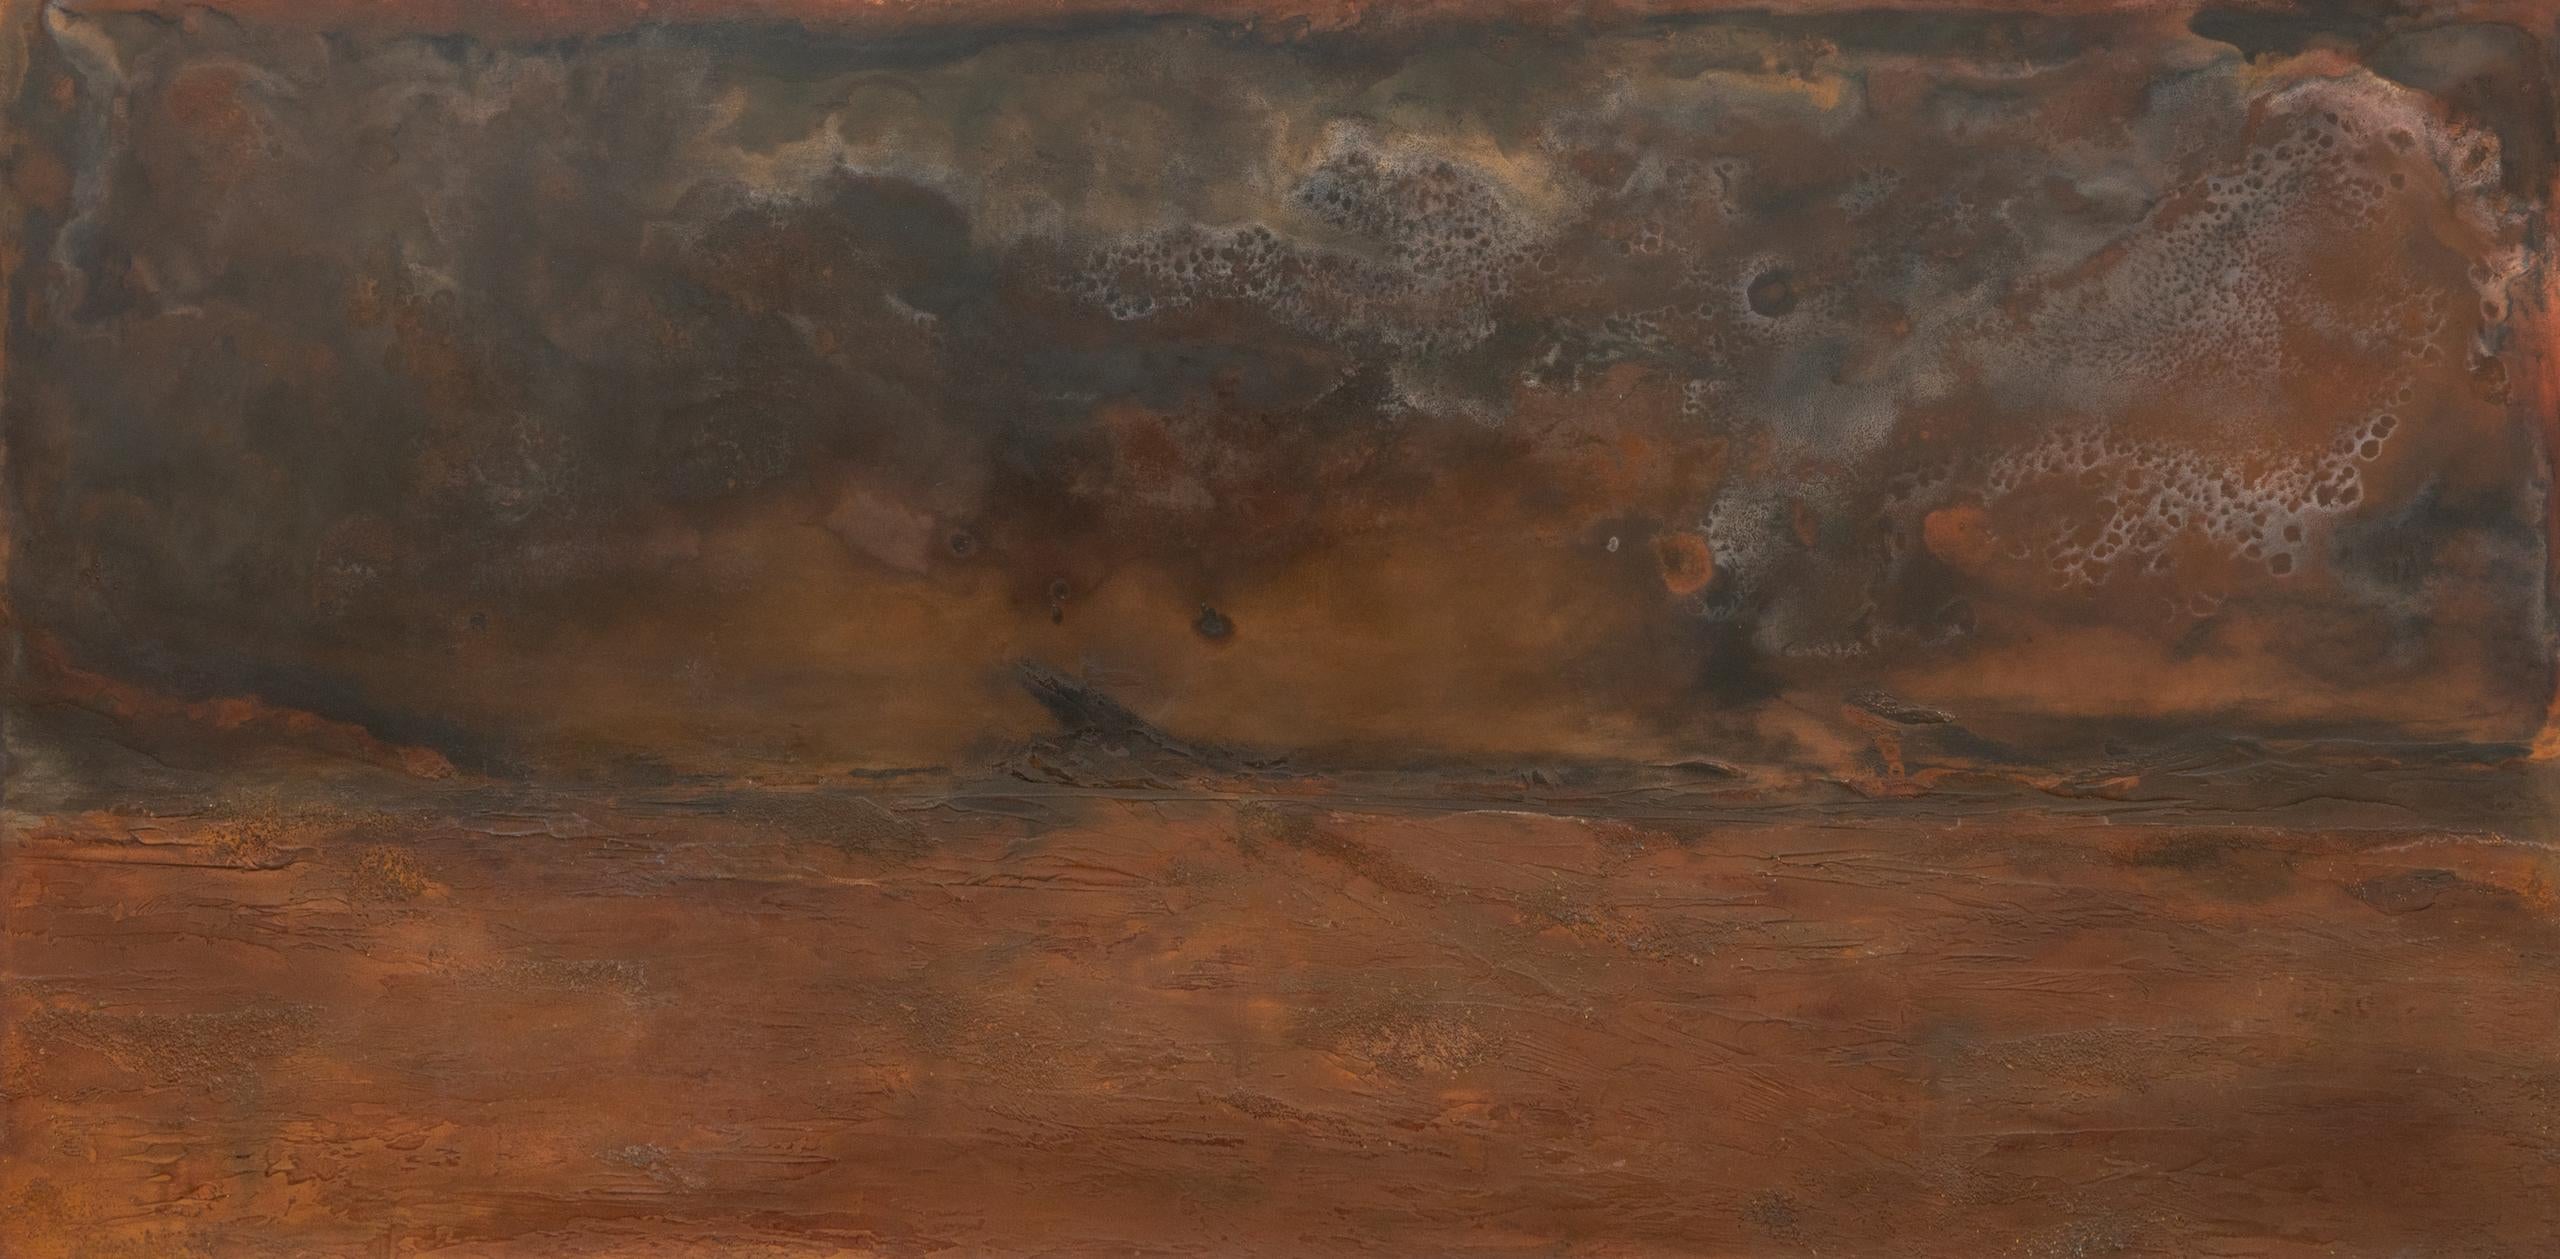 Infinity on Danakil by Frédérique Domergue - Abstract painting on metal, brown